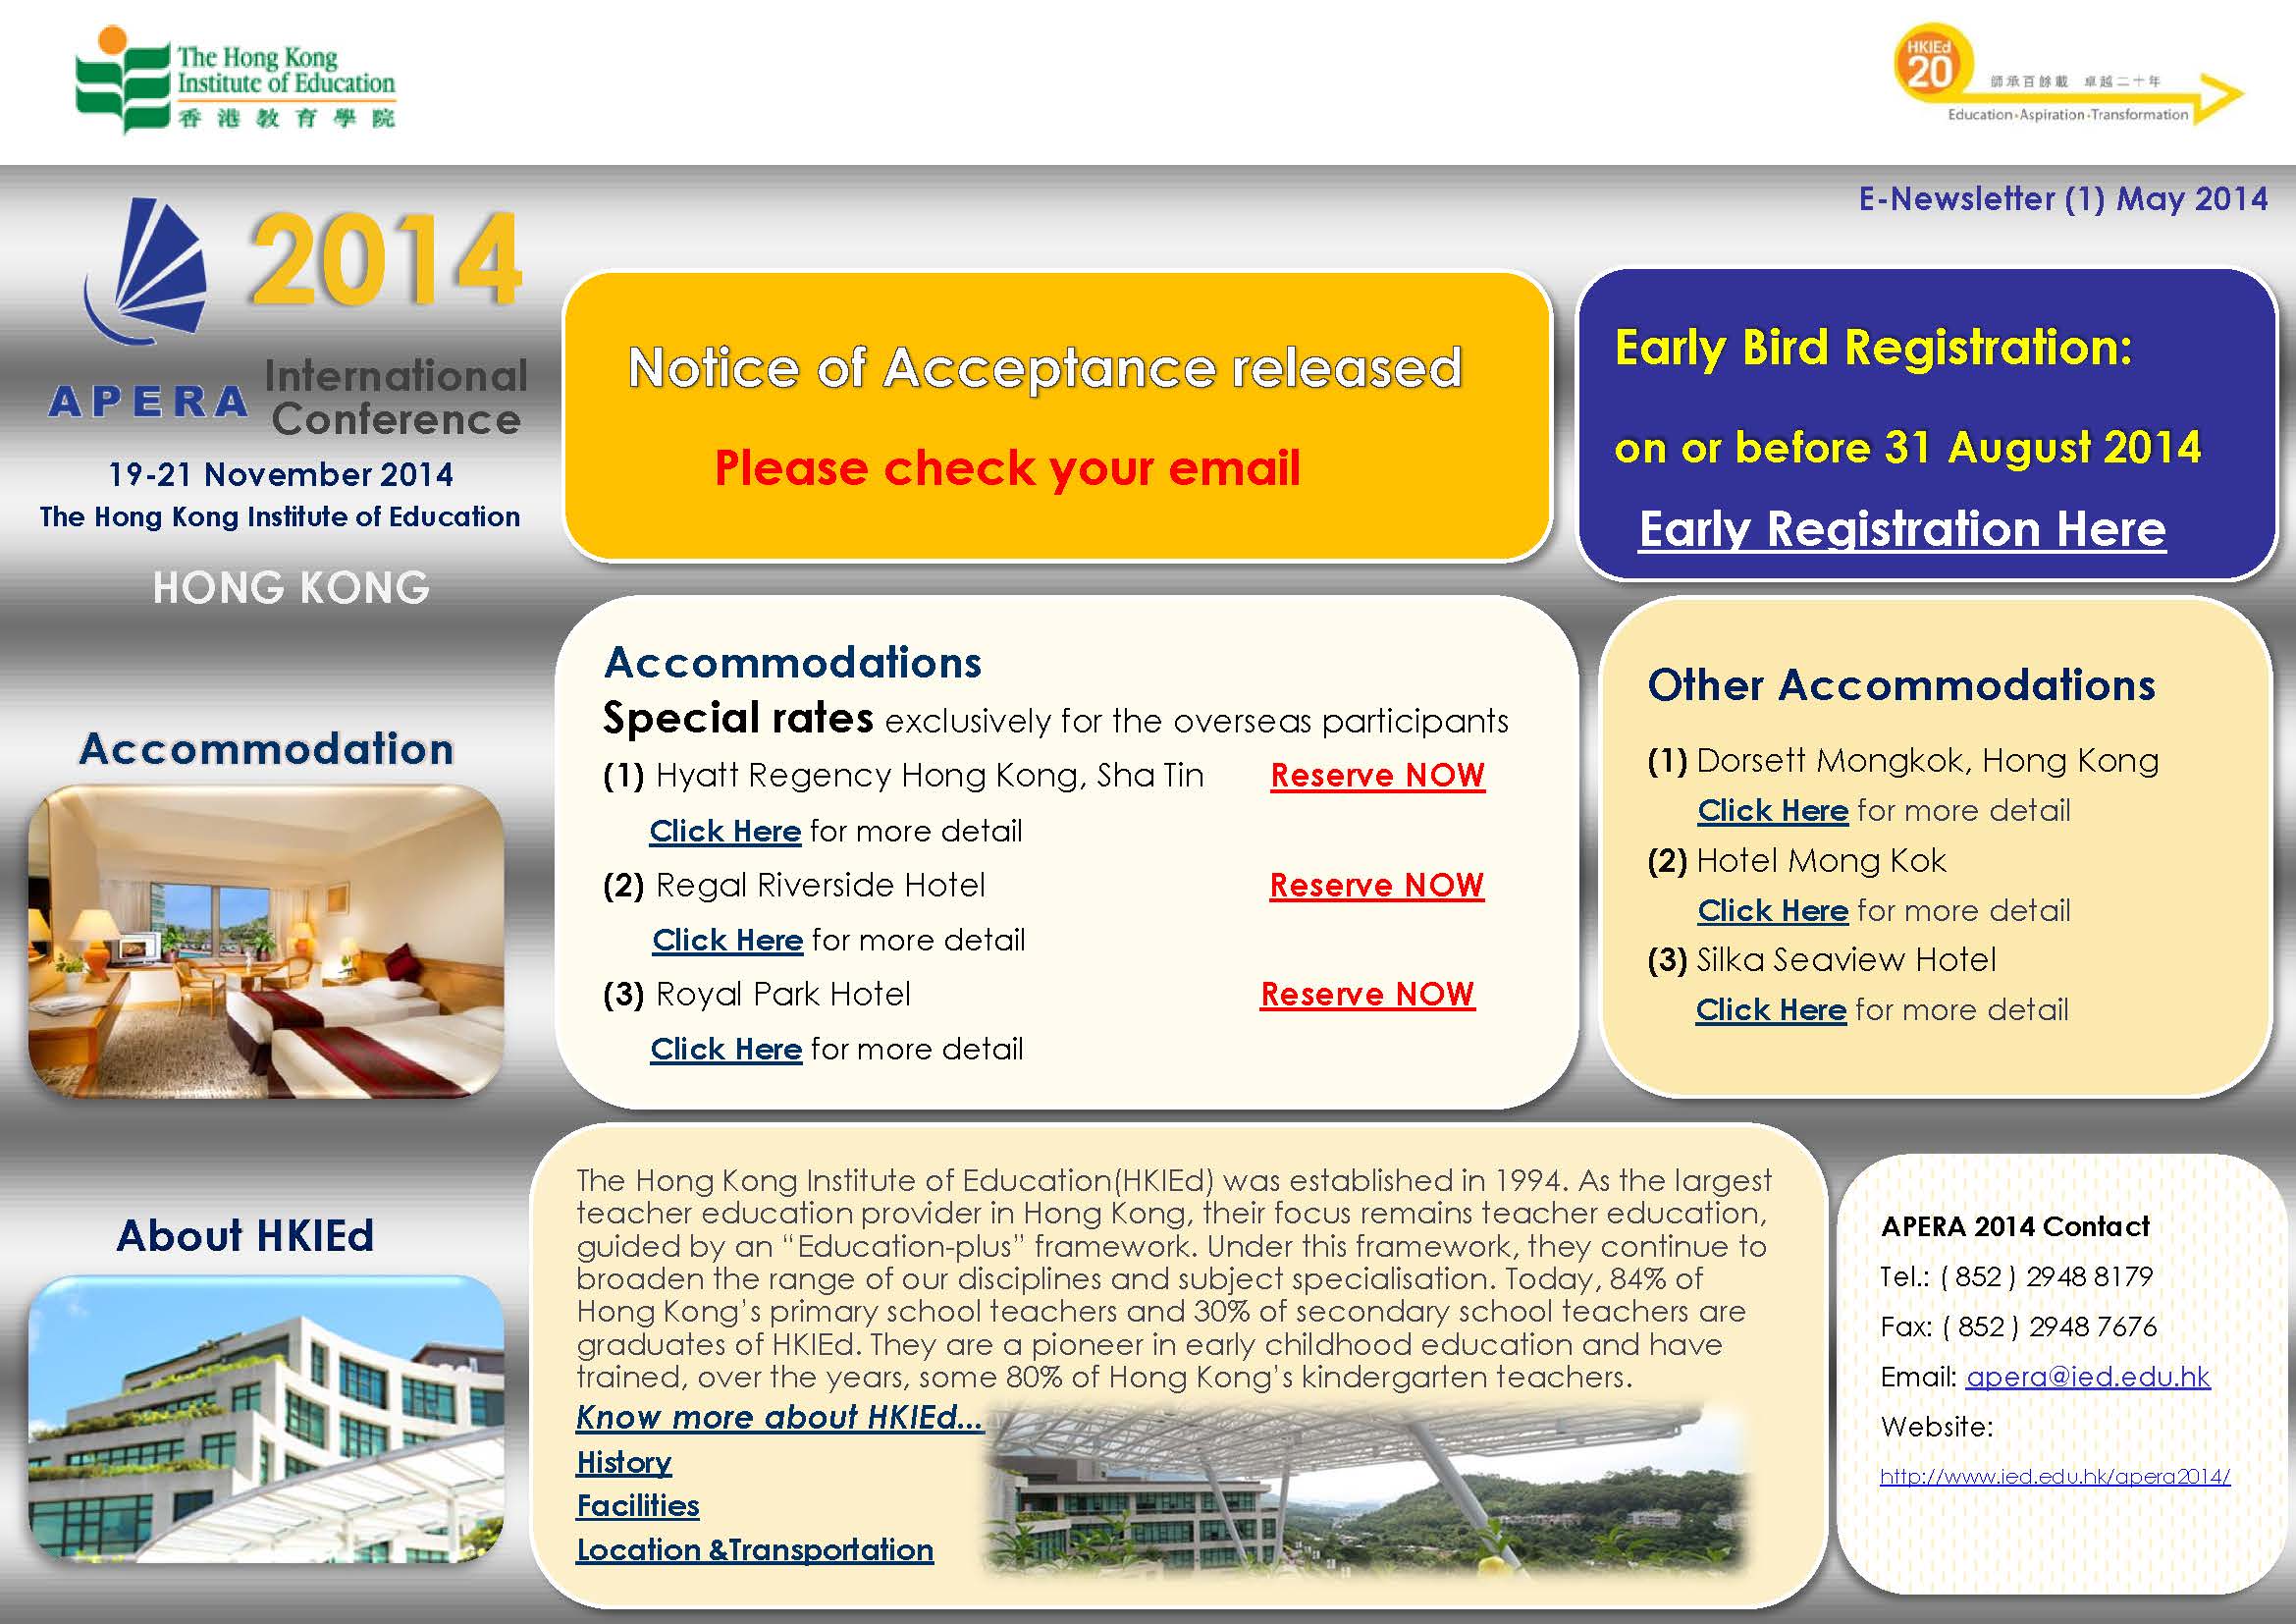 Email Newsletter 2014 May